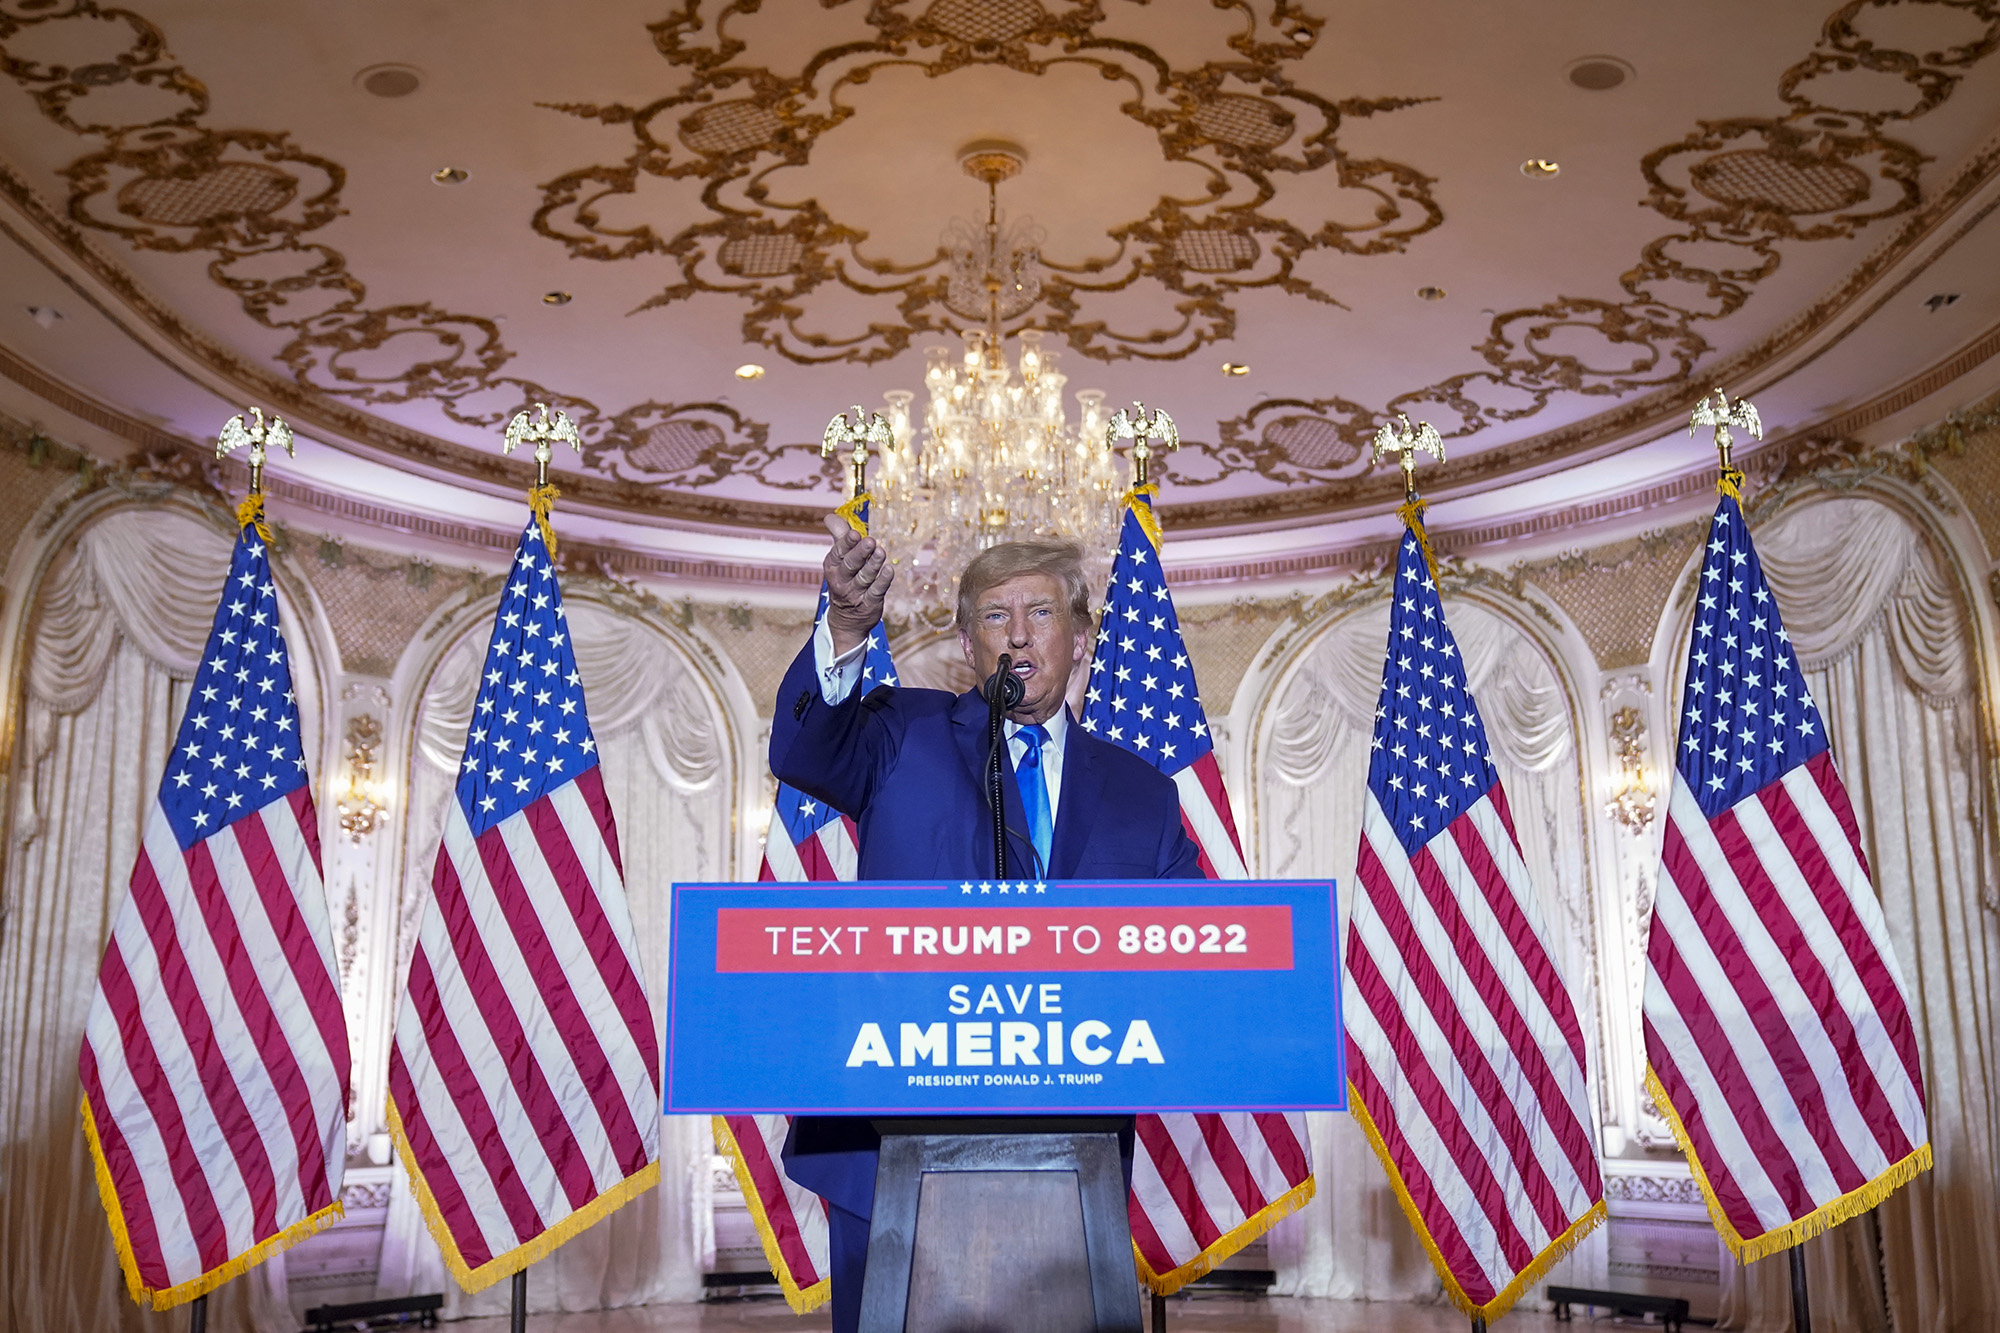 PHOTO: Former President Donald Trump speaks at Mar-a-lago on Election Day in Palm Beach, Fla., Nov. 8, 2022.